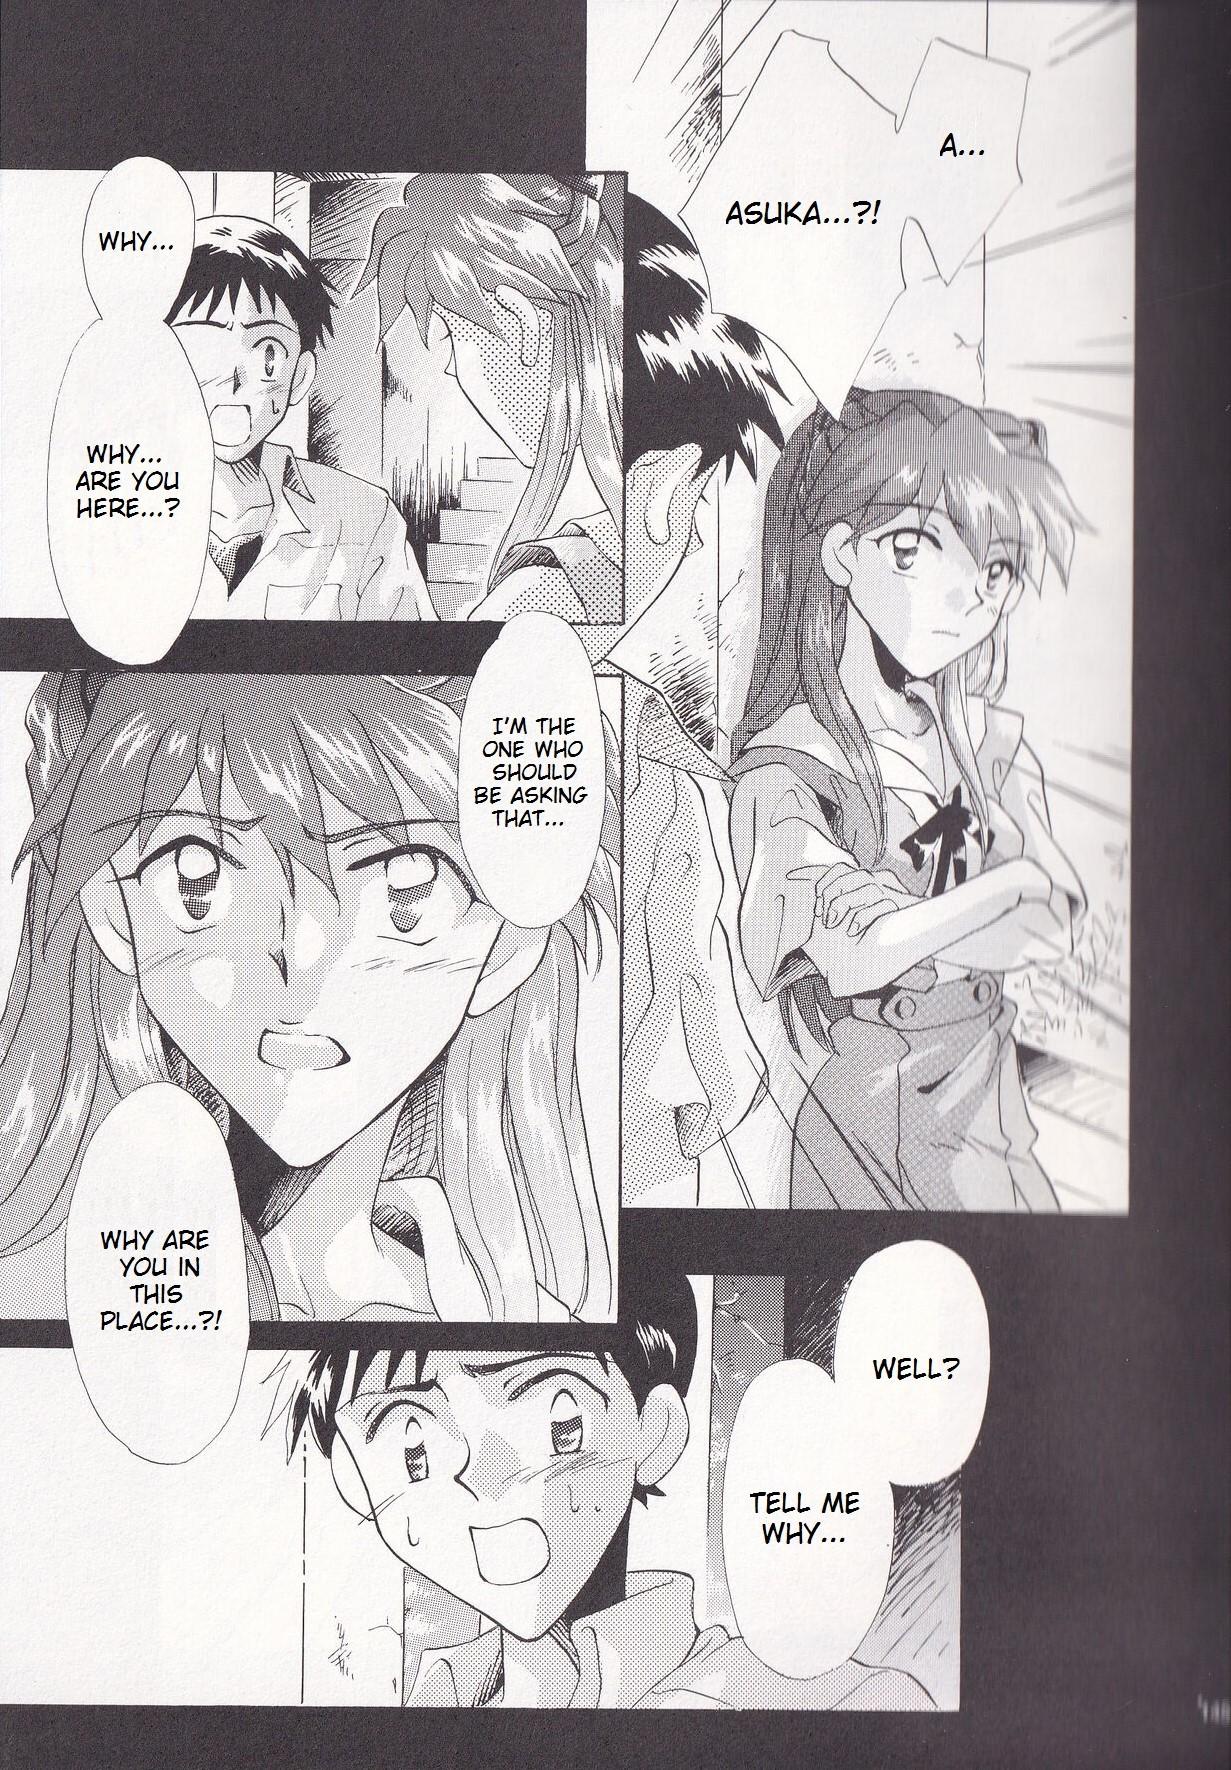 Role Play Close your eyes Episode 0:4 - Neon genesis evangelion Hot Girls Fucking - Page 11